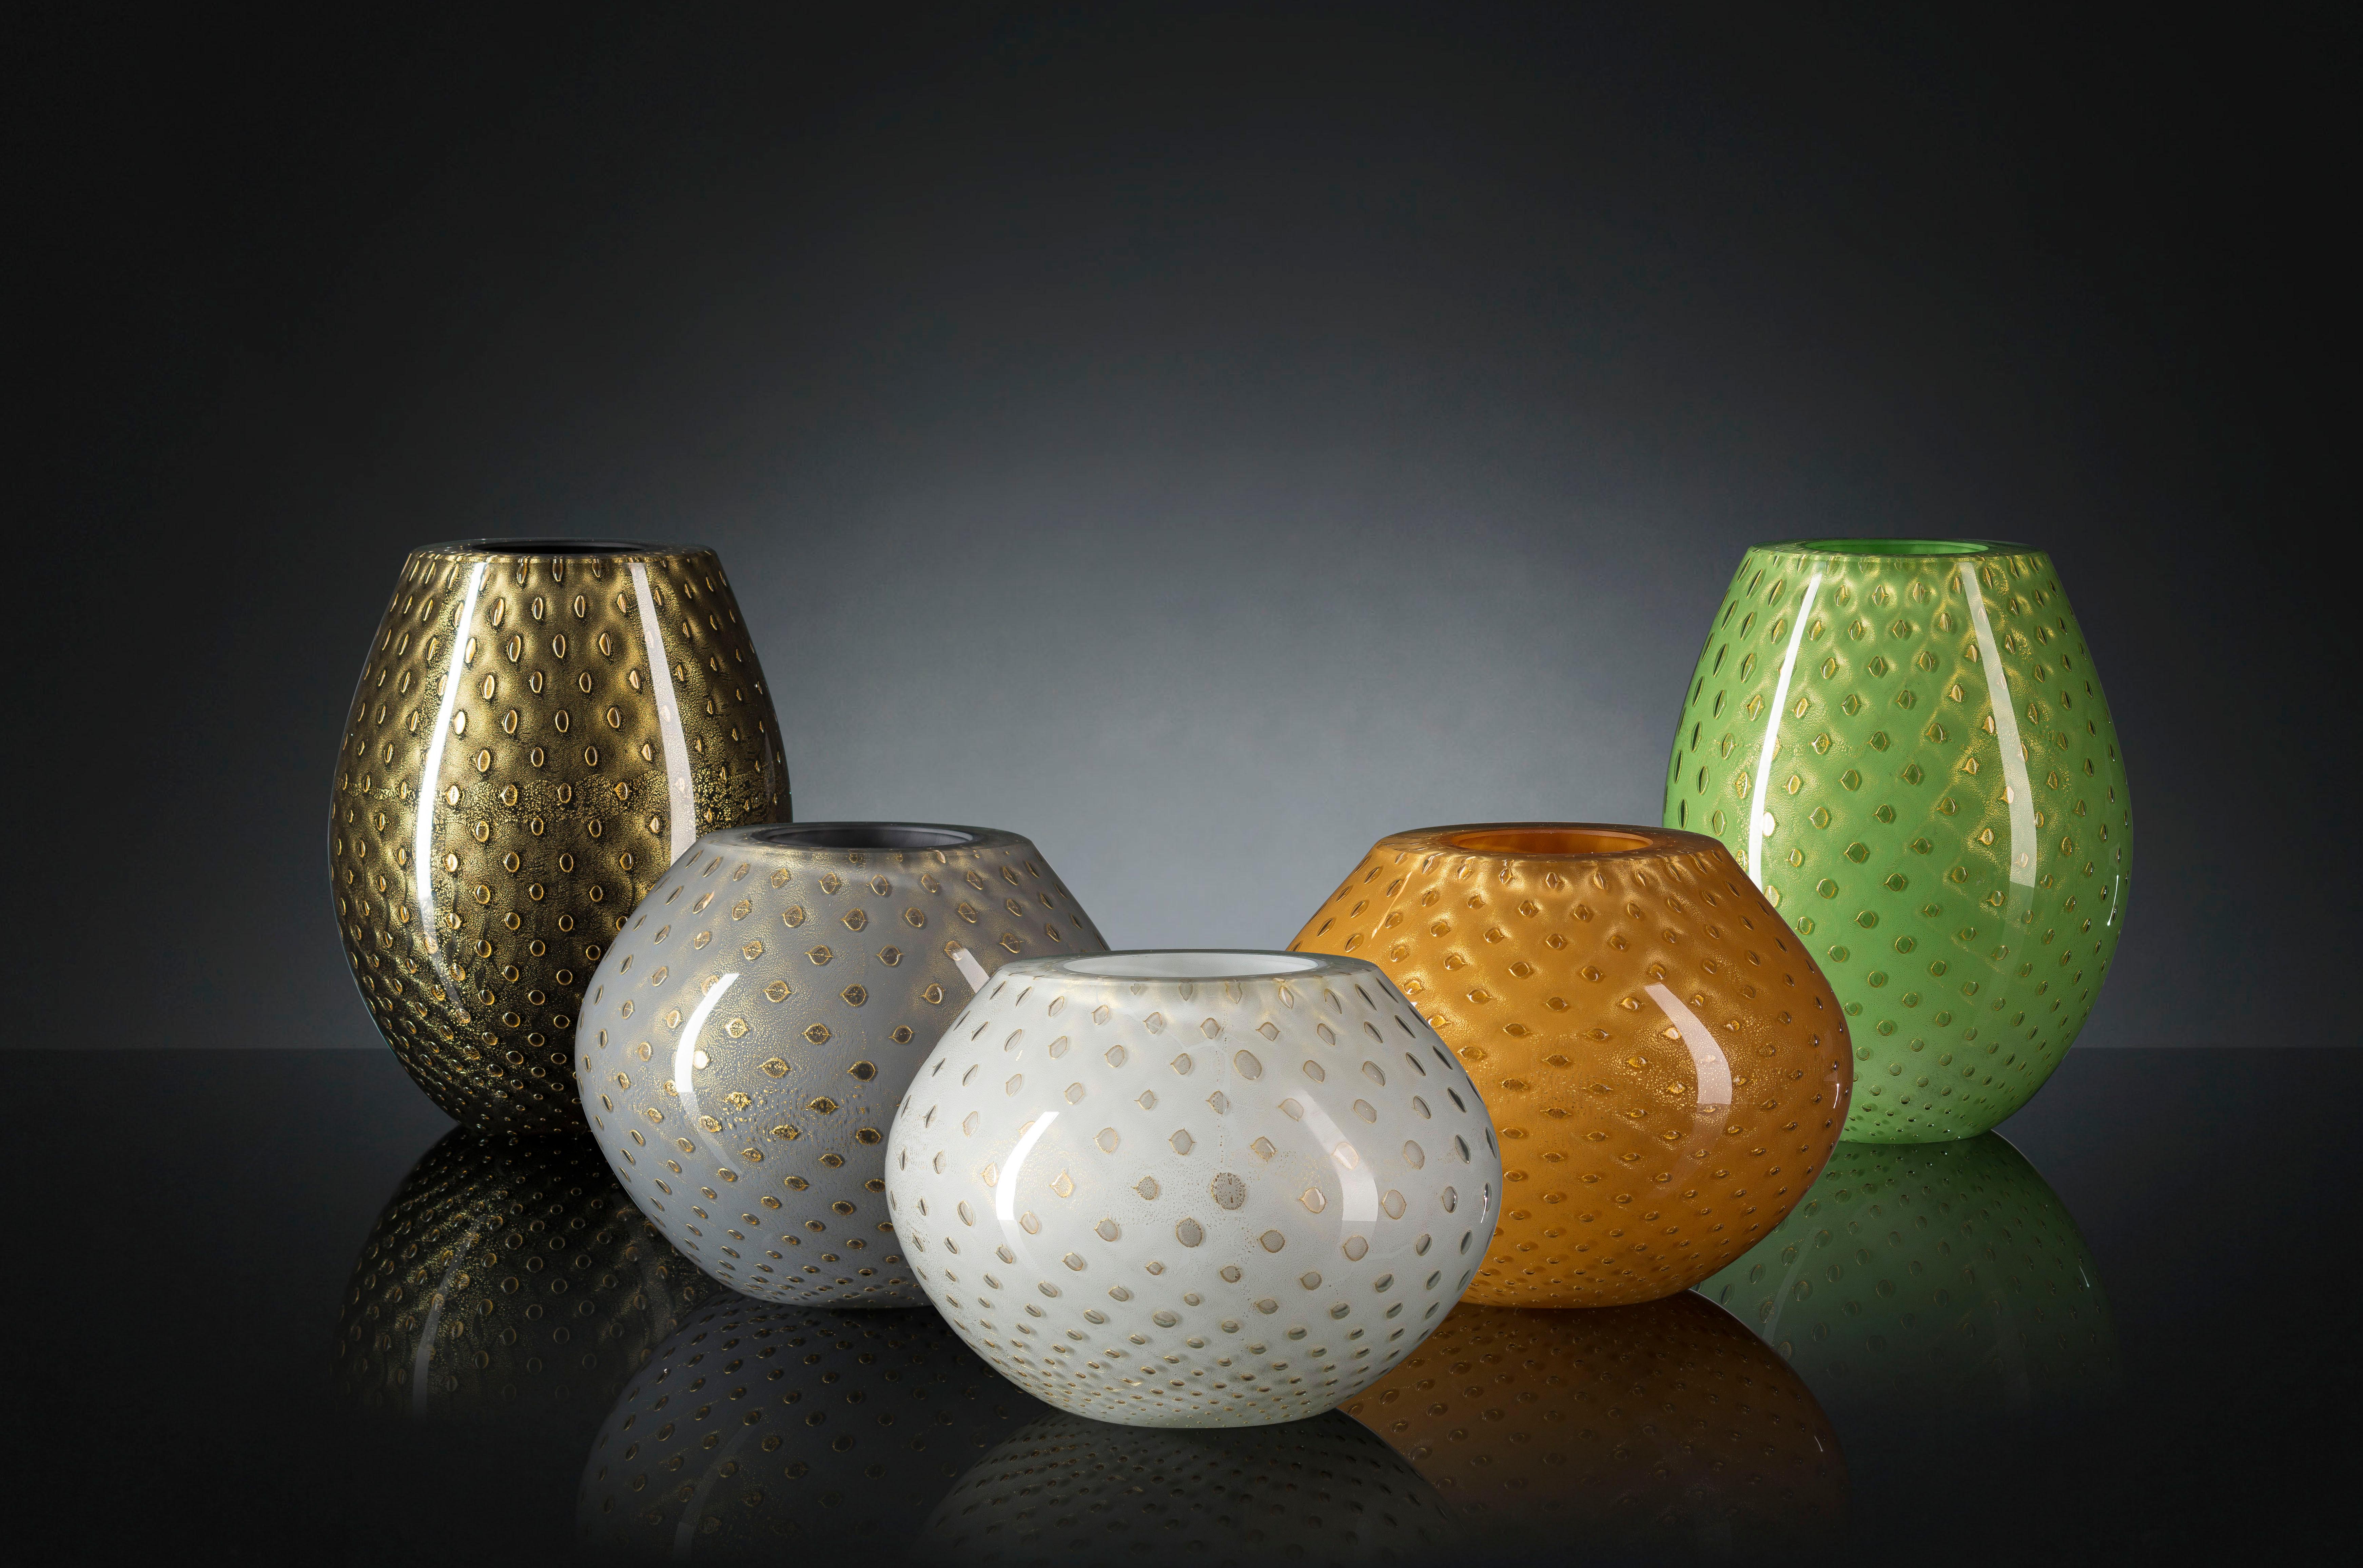 Oval Vase Mocenigo, Muranese Glass, Gold 24-Karat and Light Green, Italy In New Condition For Sale In Treviso, Treviso